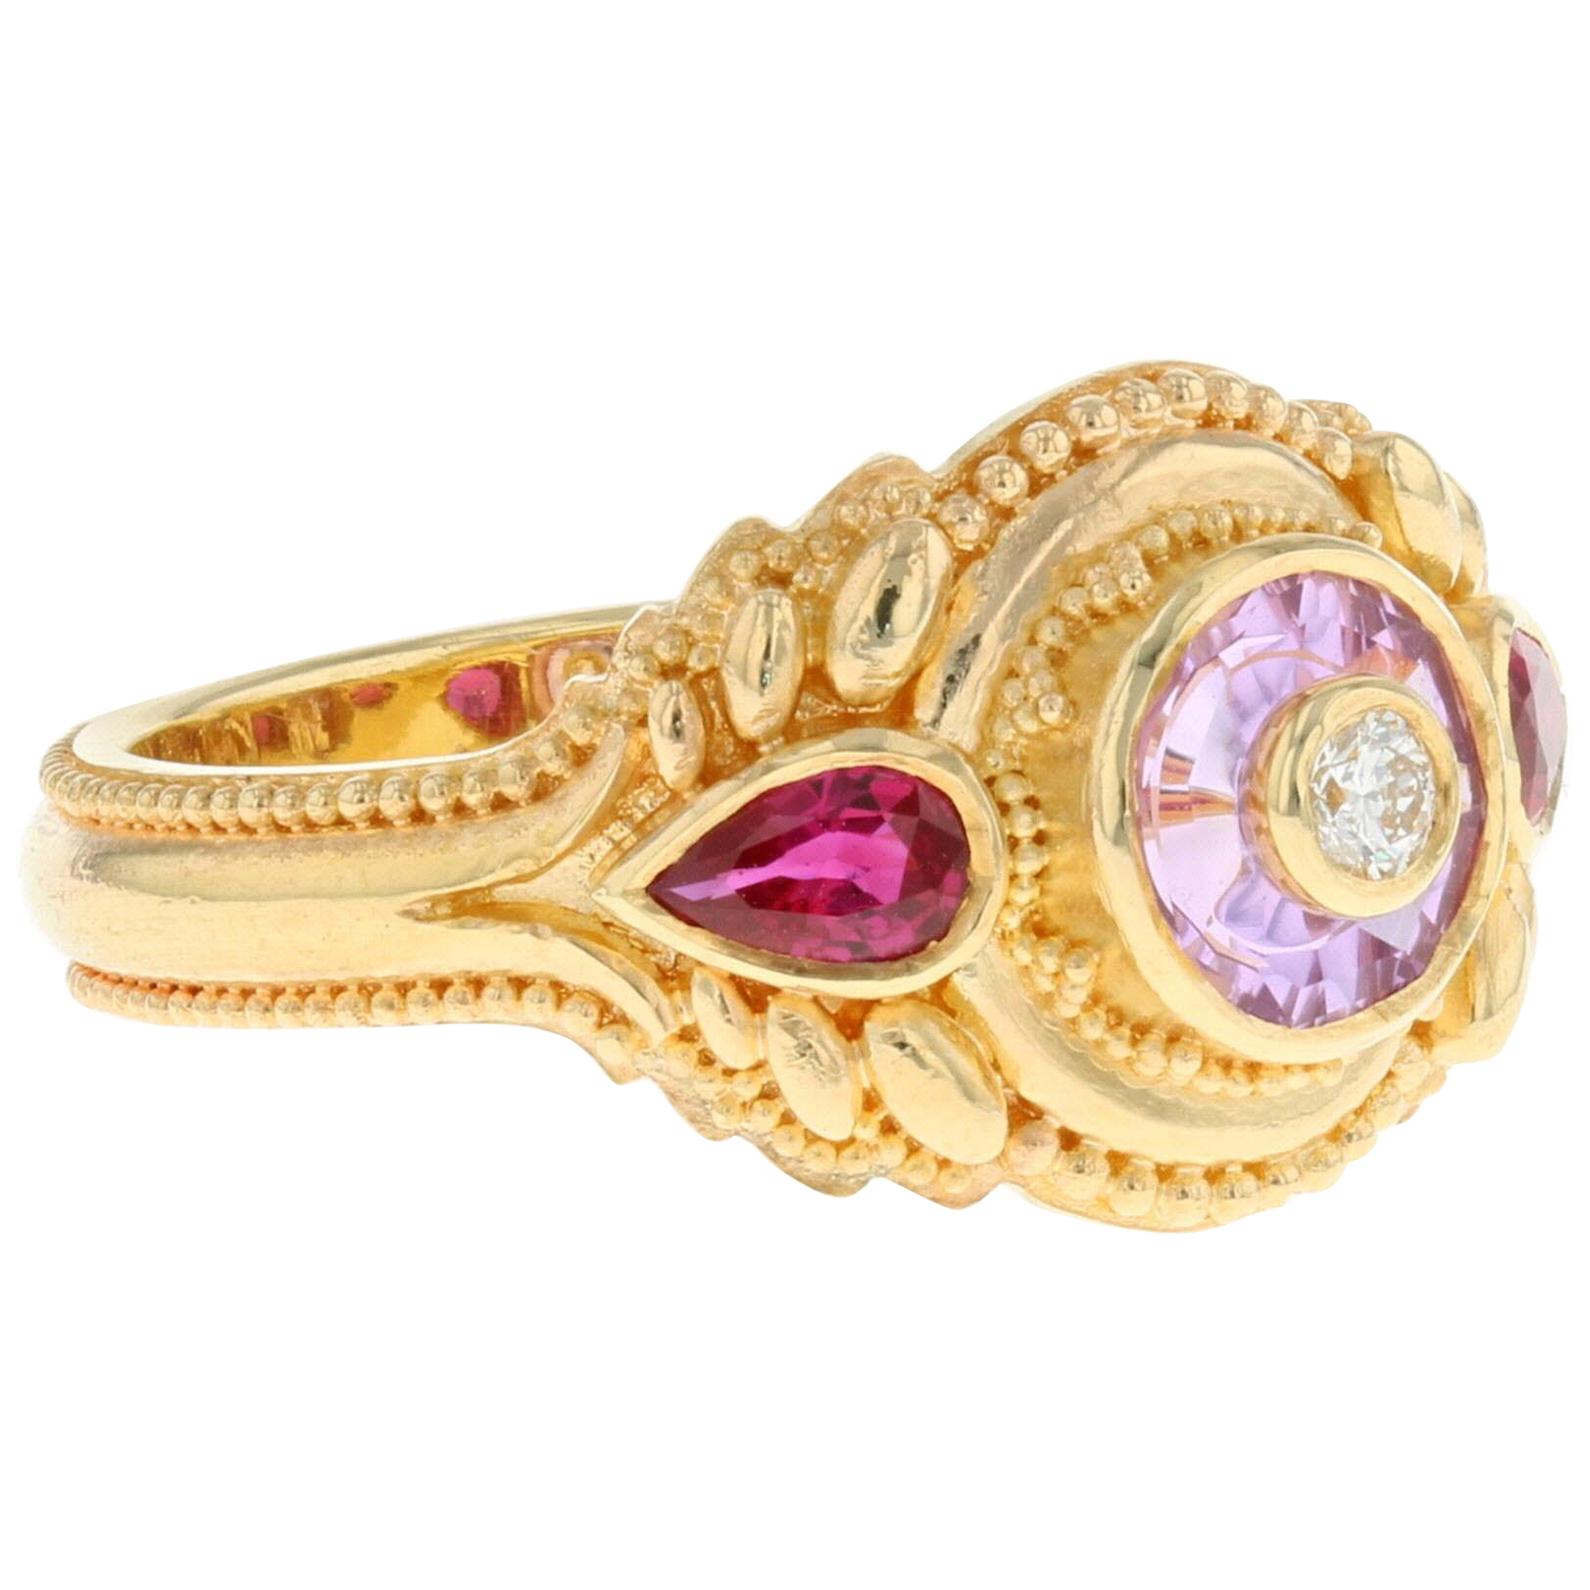 Kent Raible's Bespoke 18k Gold Pink Sapphire, Ruby and Diamond Cocktail Ring